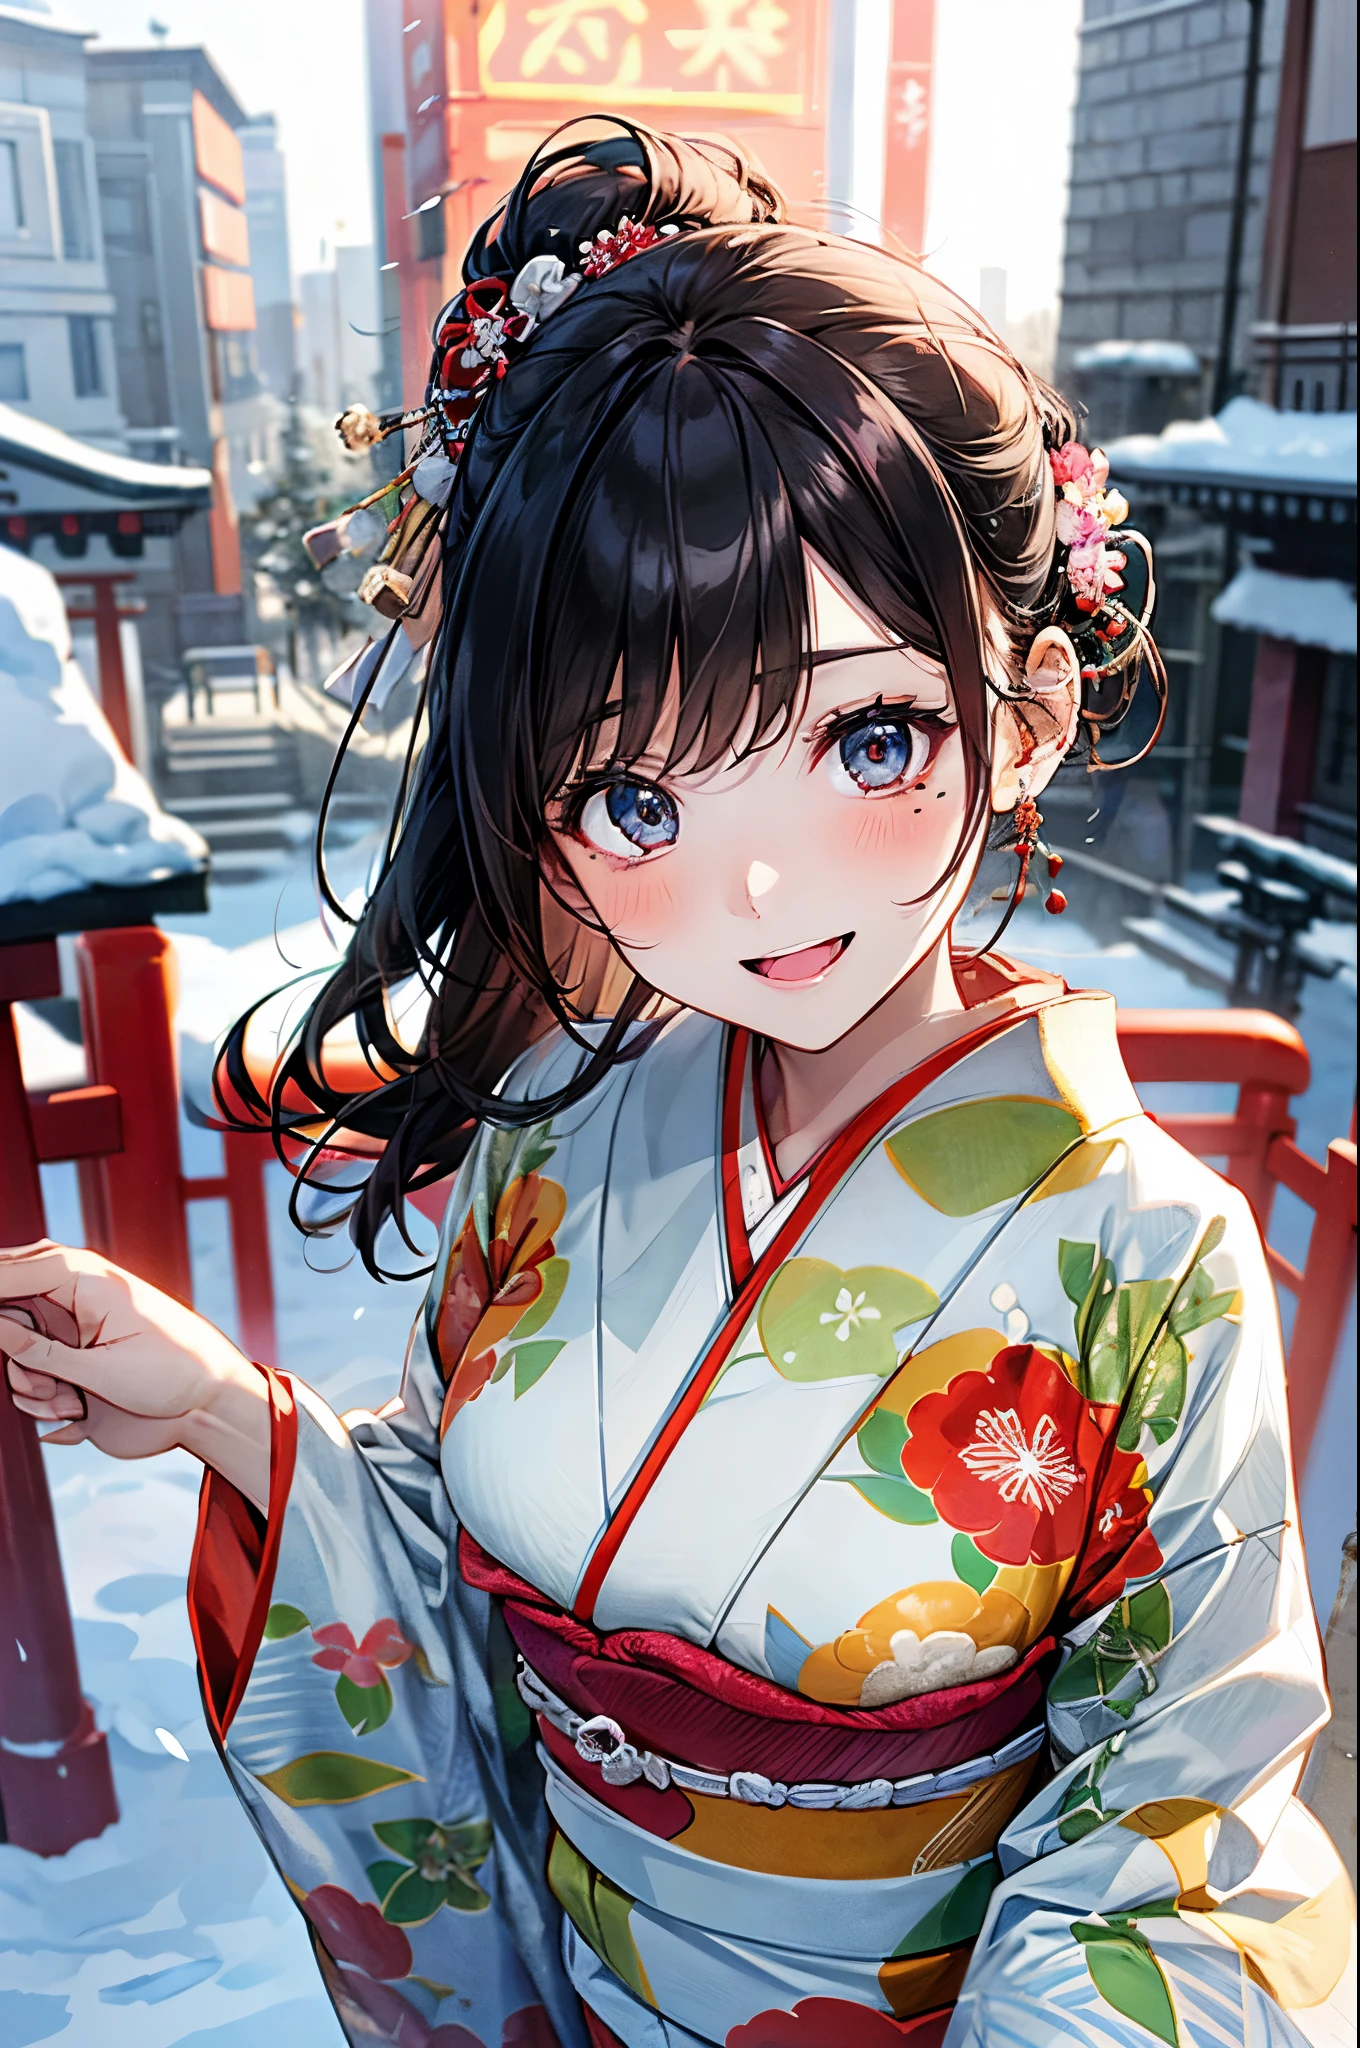 ((perfect anatomy, anatomically correct, super detailed skin)), 
1 girl, japanese, high school girl, shiny skin, large breasts:0.5, looking up, watching the view, 
beautiful hair, beautiful face, beautiful detailed eyes, (middle hair:1.5, japanese hair:1.5), black hair, blue eyes, babyface, mole under eye, 
(((red floral kimono), hair ornament)), 
((smile:1.5, open your mouth wide)), walking, 
(beautiful scenery), winter, dawn, (new year's day, first visit), hokkaido, sapporo, outside hokkaido shrine, crowd, snow, snowfall:1.5, freezing weather, frost, 
(8k, top-quality, masterpiece​:1.2, extremely detailed), (photorealistic), beautiful illustration, natural lighting,